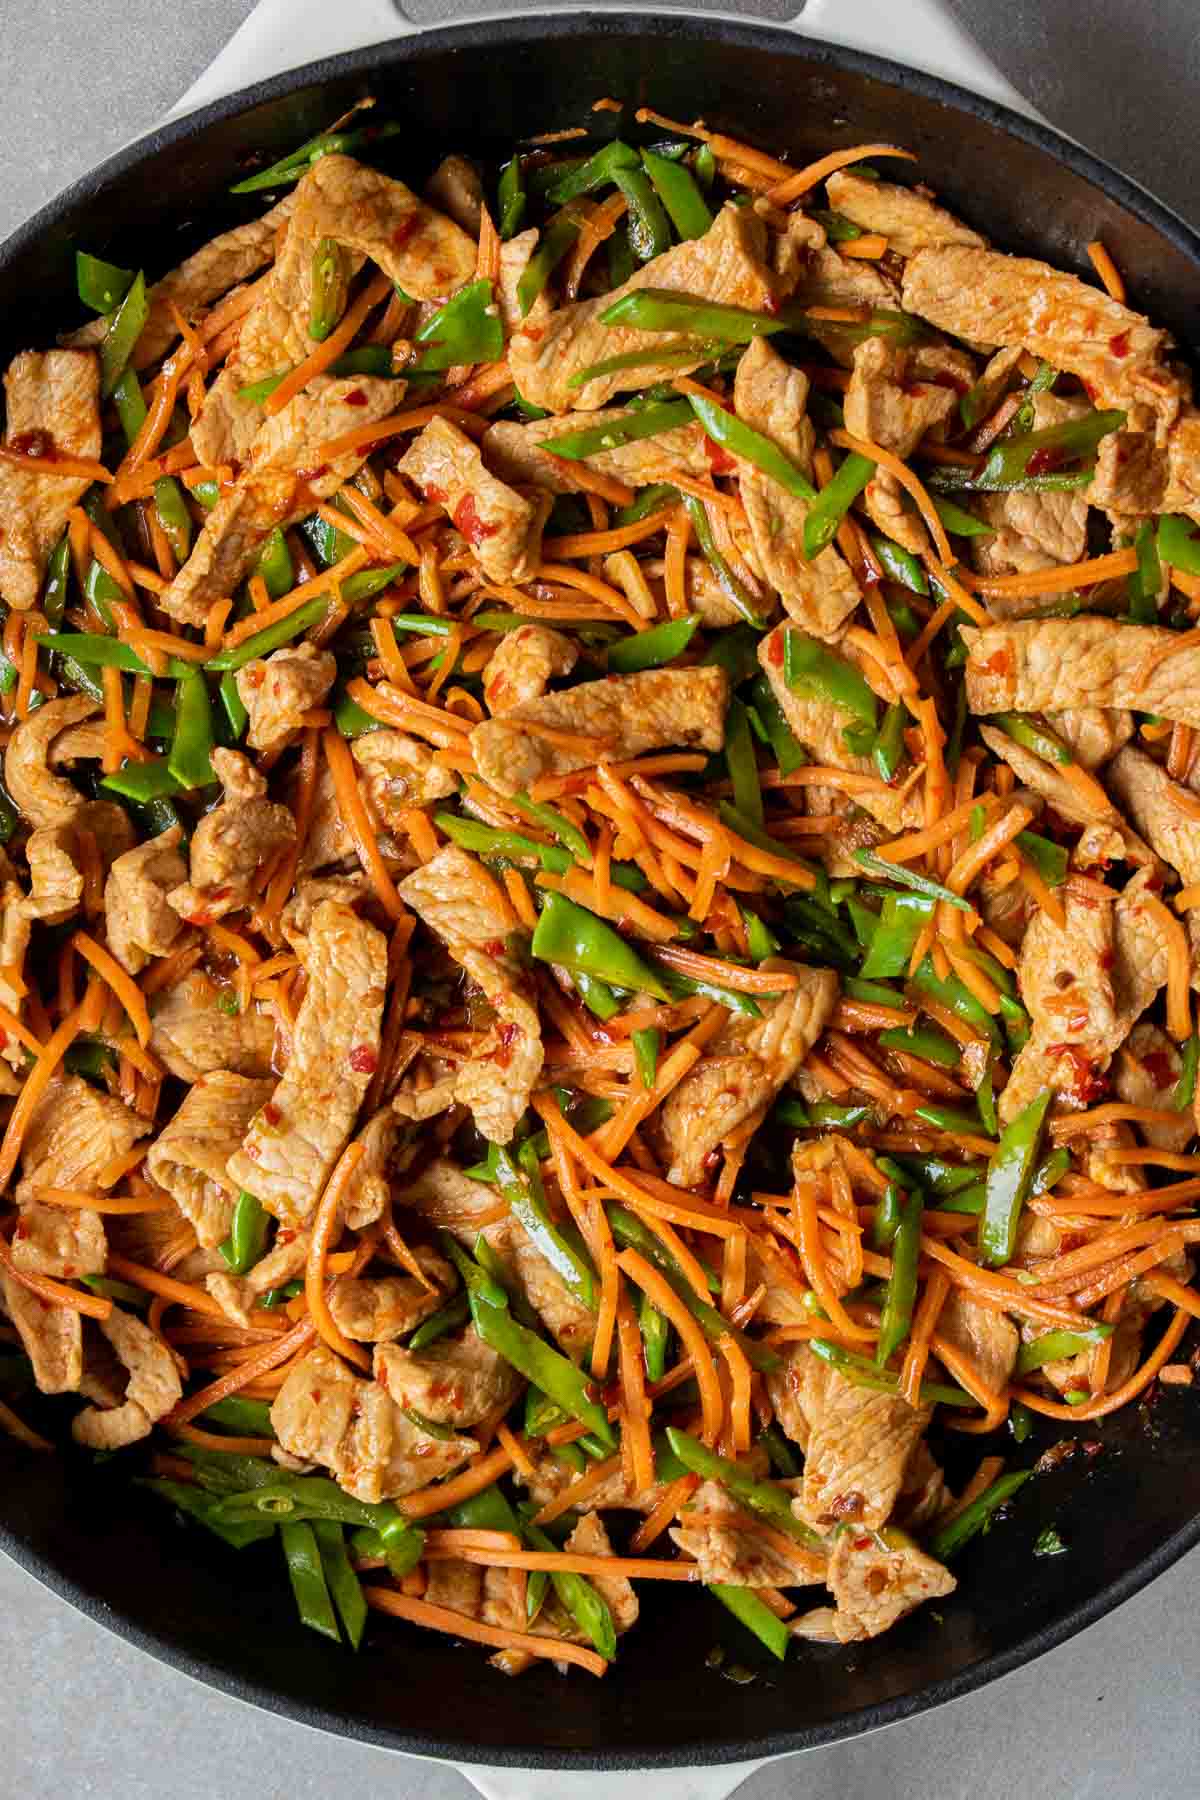 Cooked sliced pork with carrots and snow peas in a pan covered in a spicy sauce